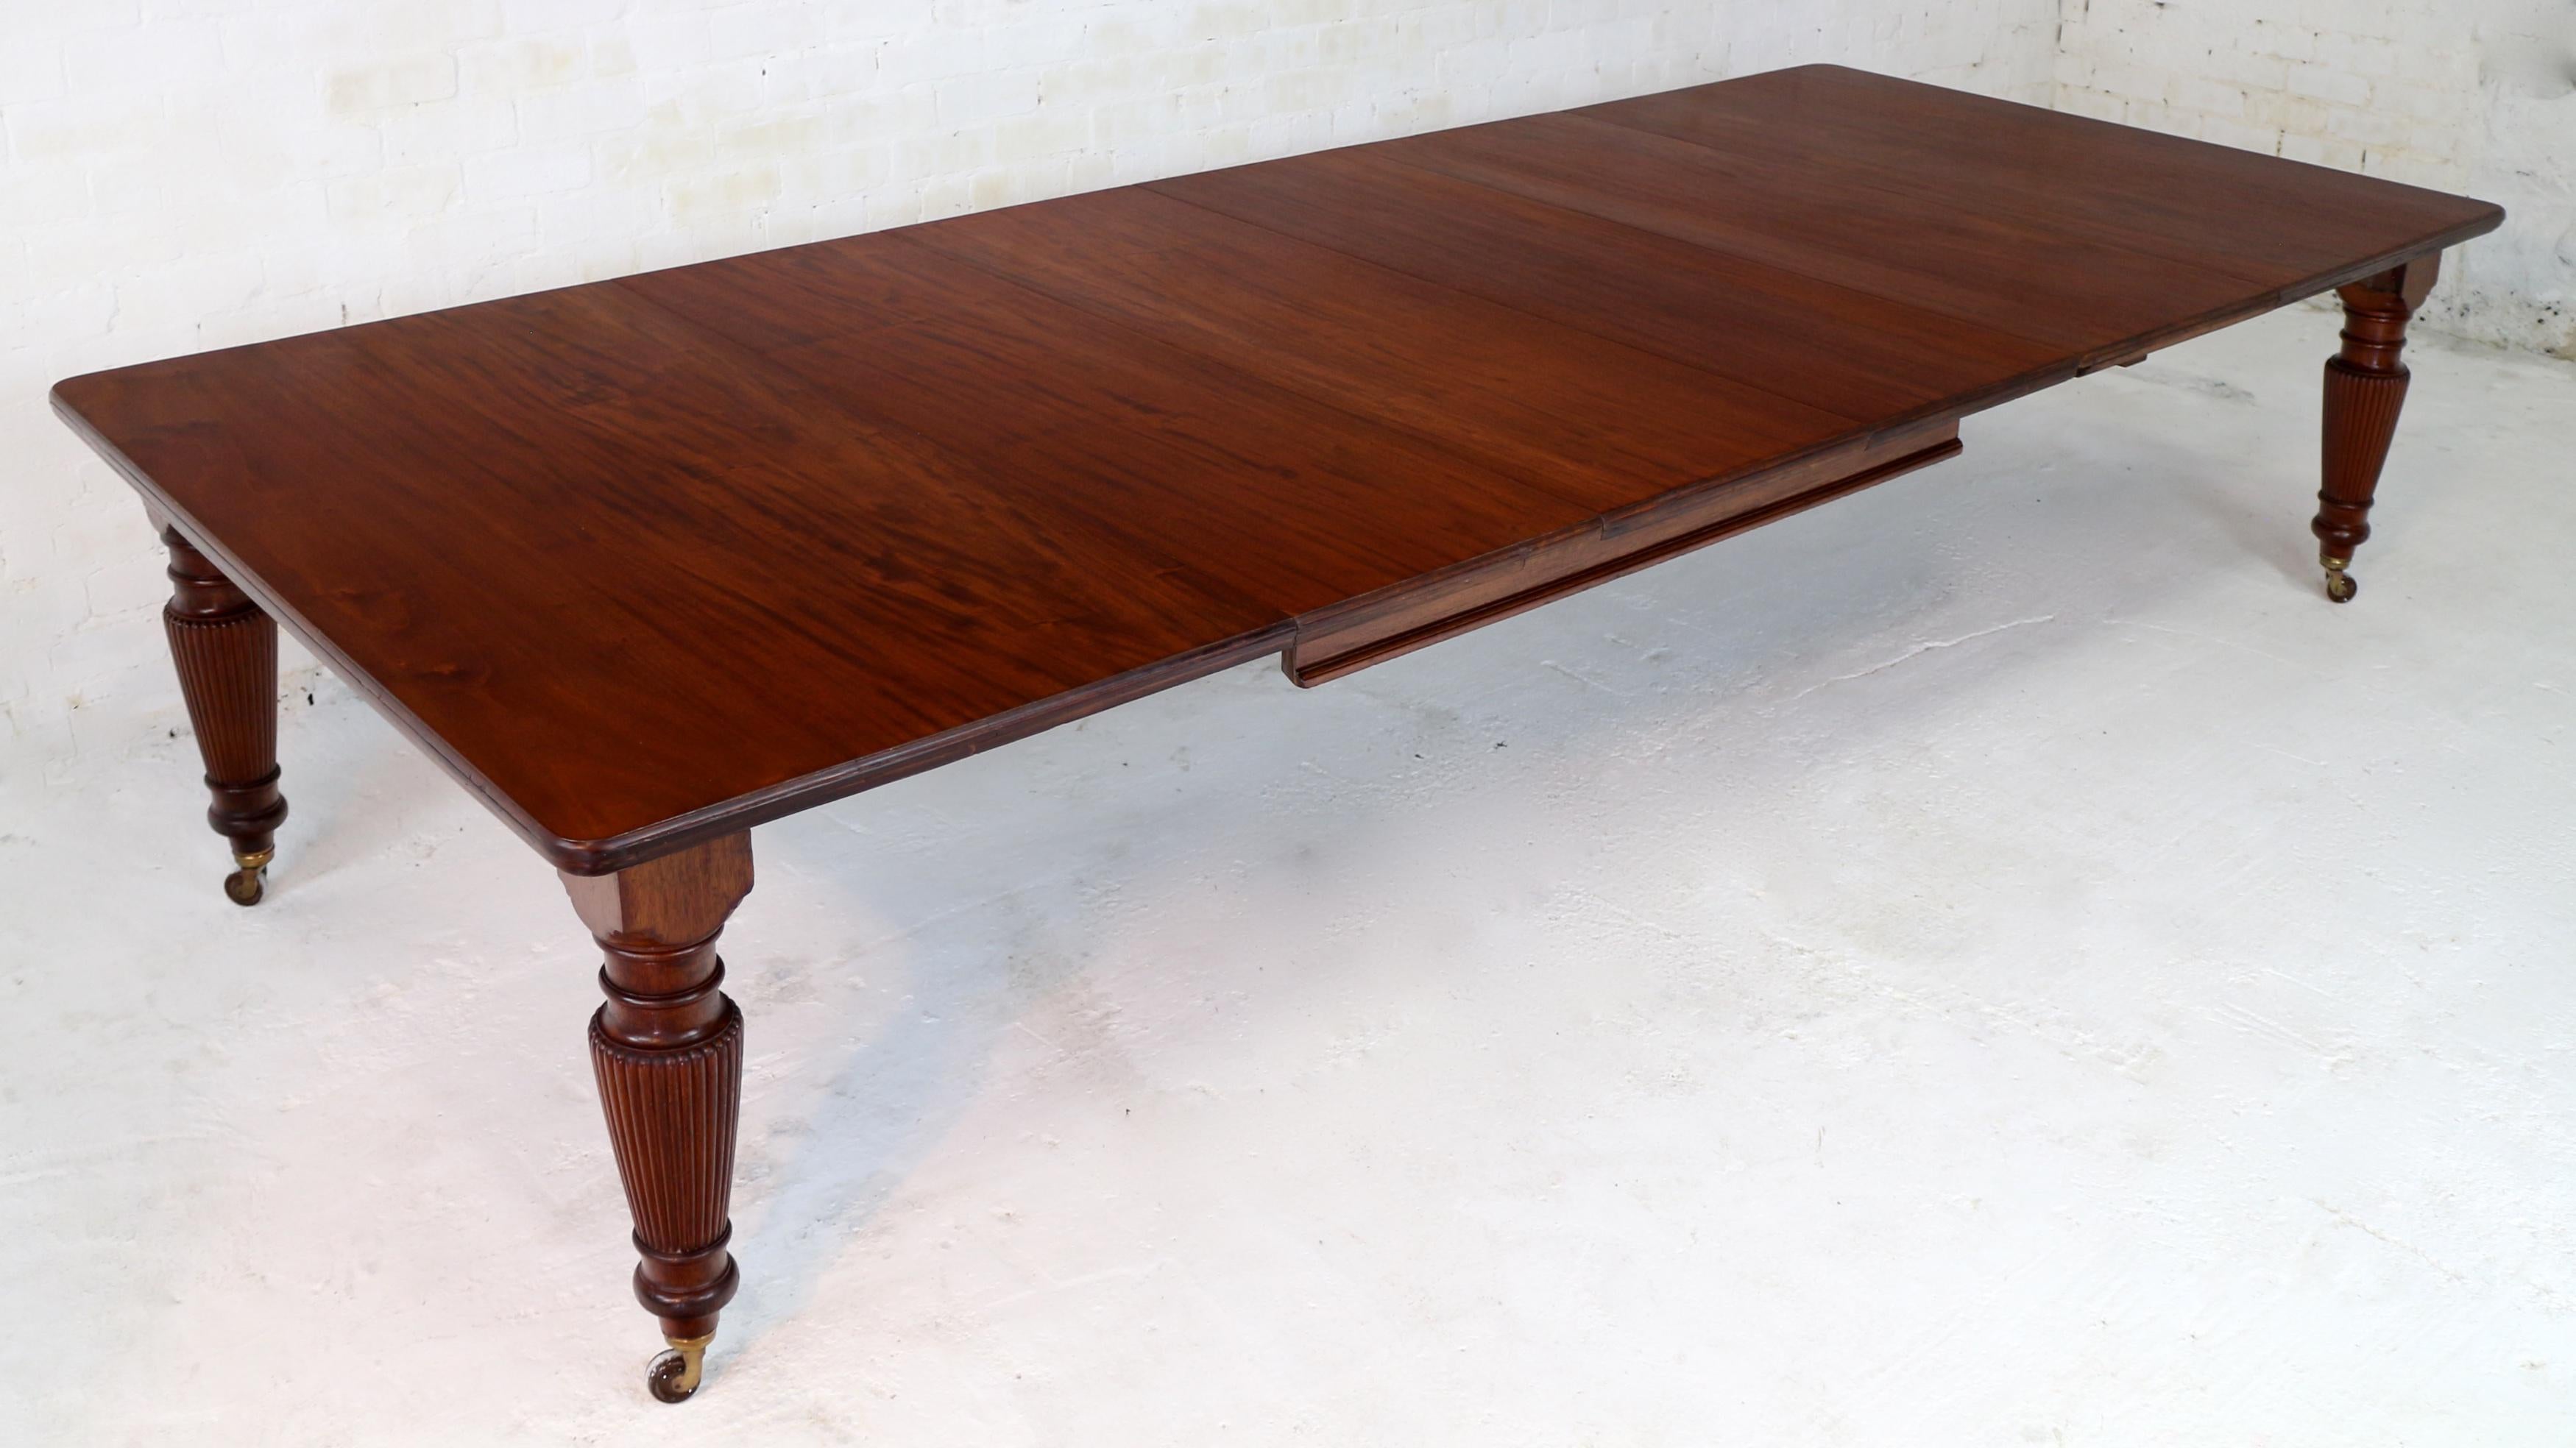 A super quality antique Victorian flame mahogany wind-out extending dining table with four additional leaves and standing on four finely reeded and turned tapering legs. This large 5ft wide table smoothly extends from 5ft 4.5in to just under 12ft by